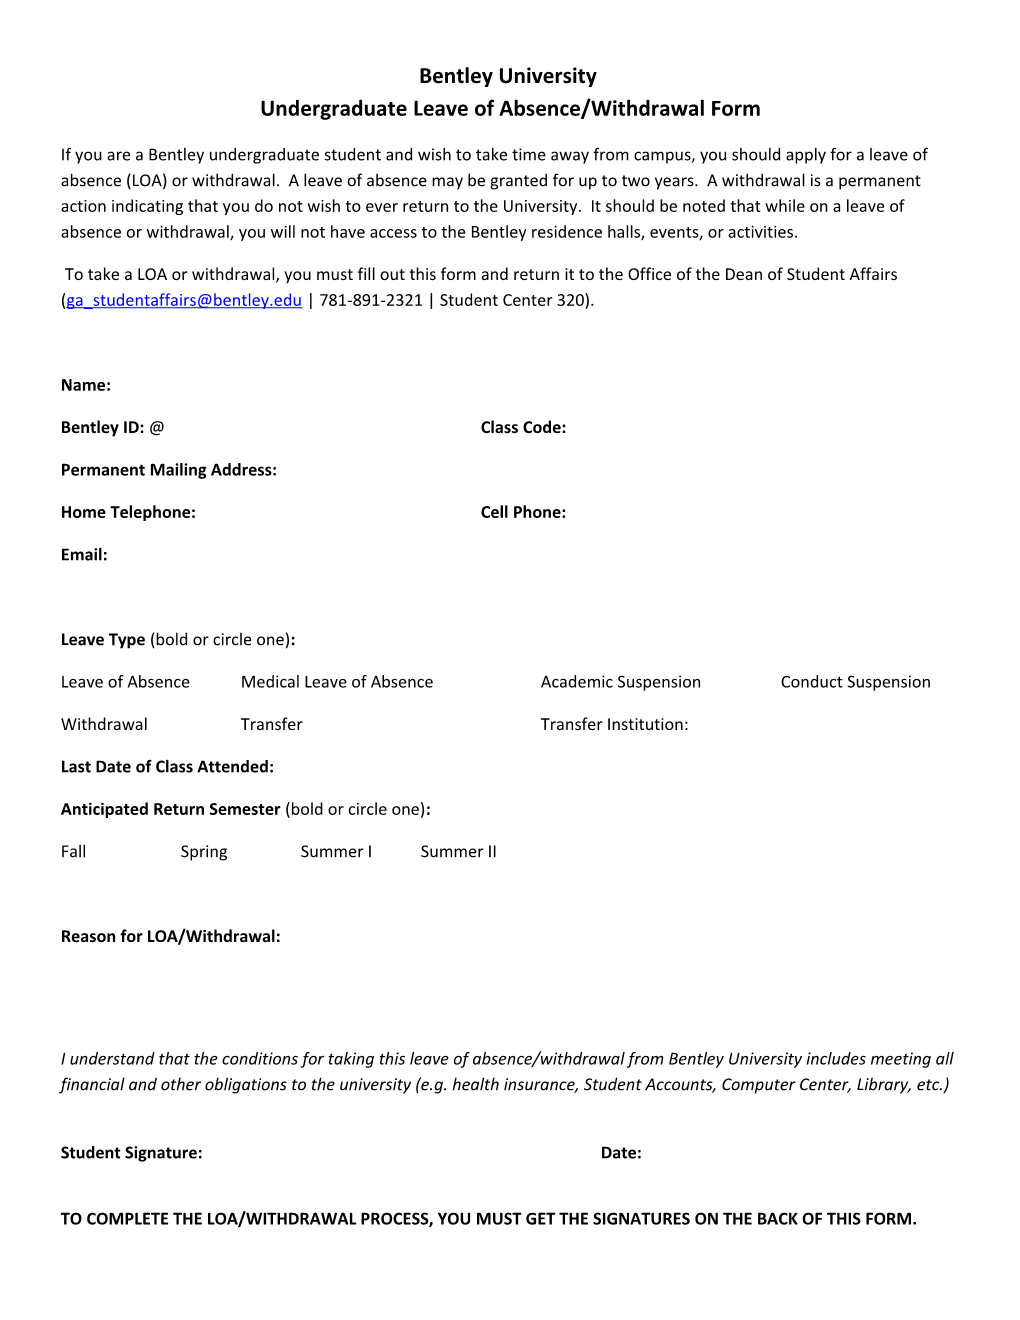 Bentley University Undergraduate Leave of Absence/Withdrawal Form